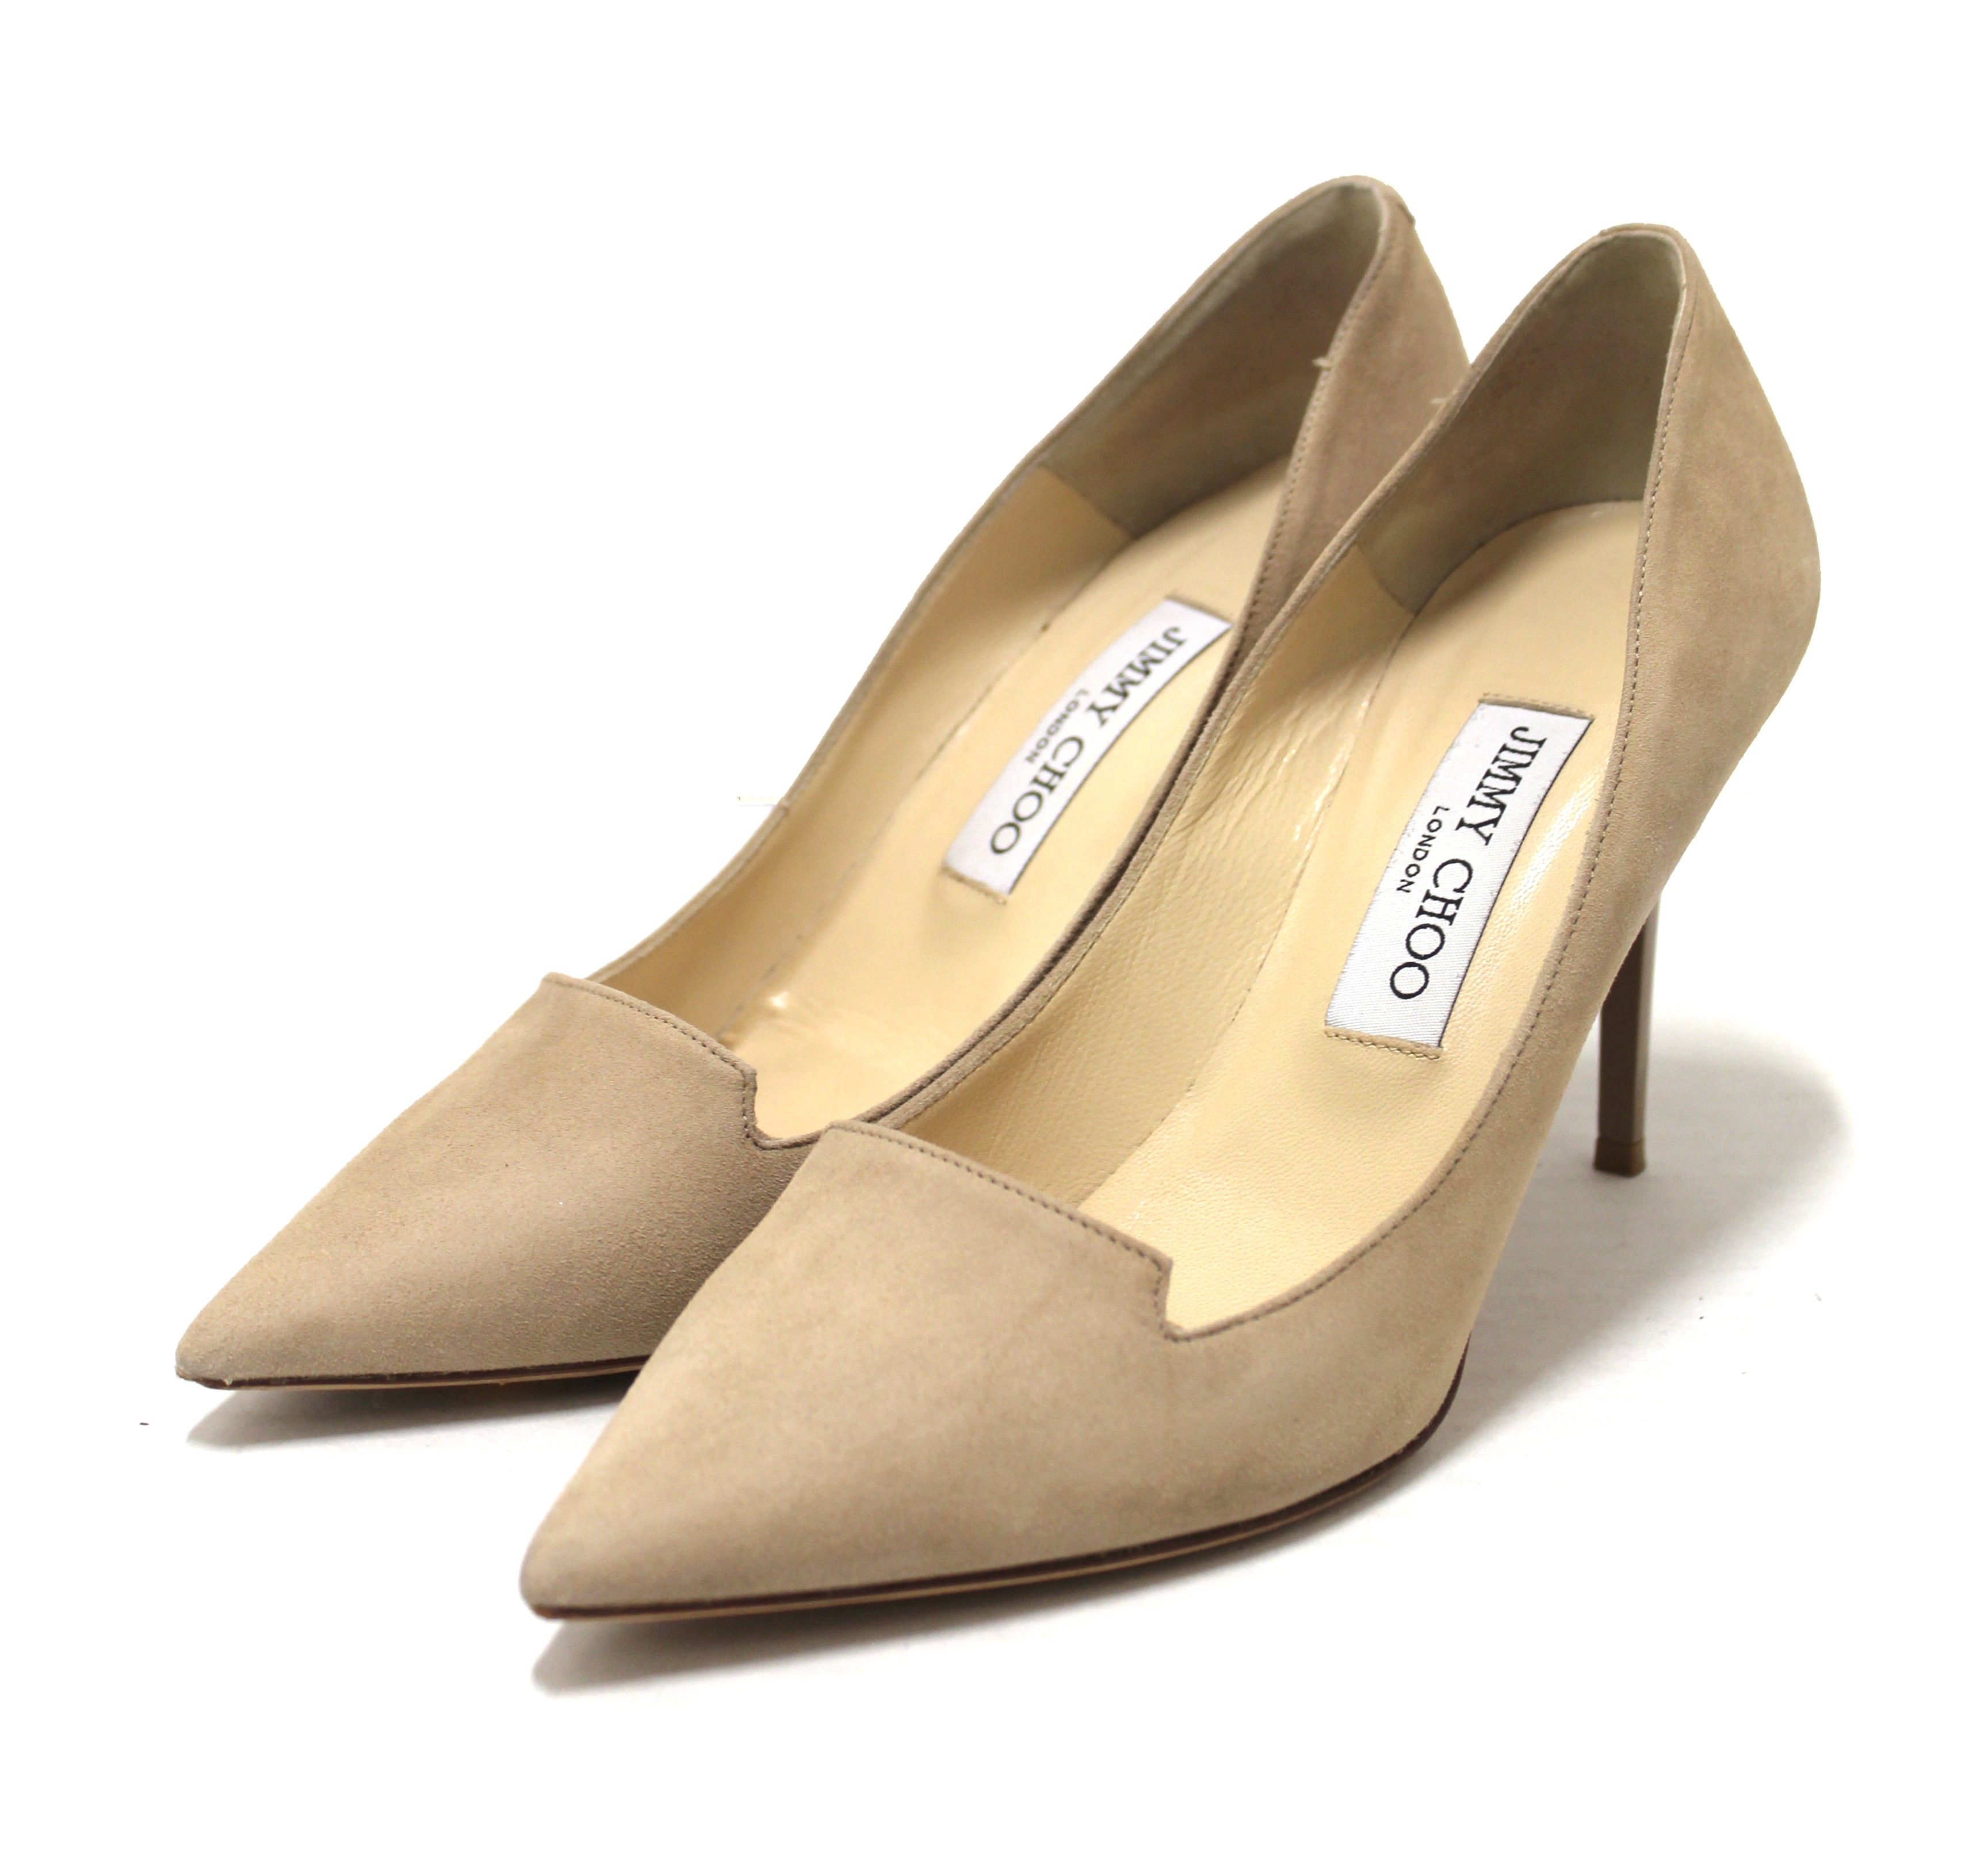 Authentic Jimmy Choo Beige Pointed Toe Suede Heels Size 37.5